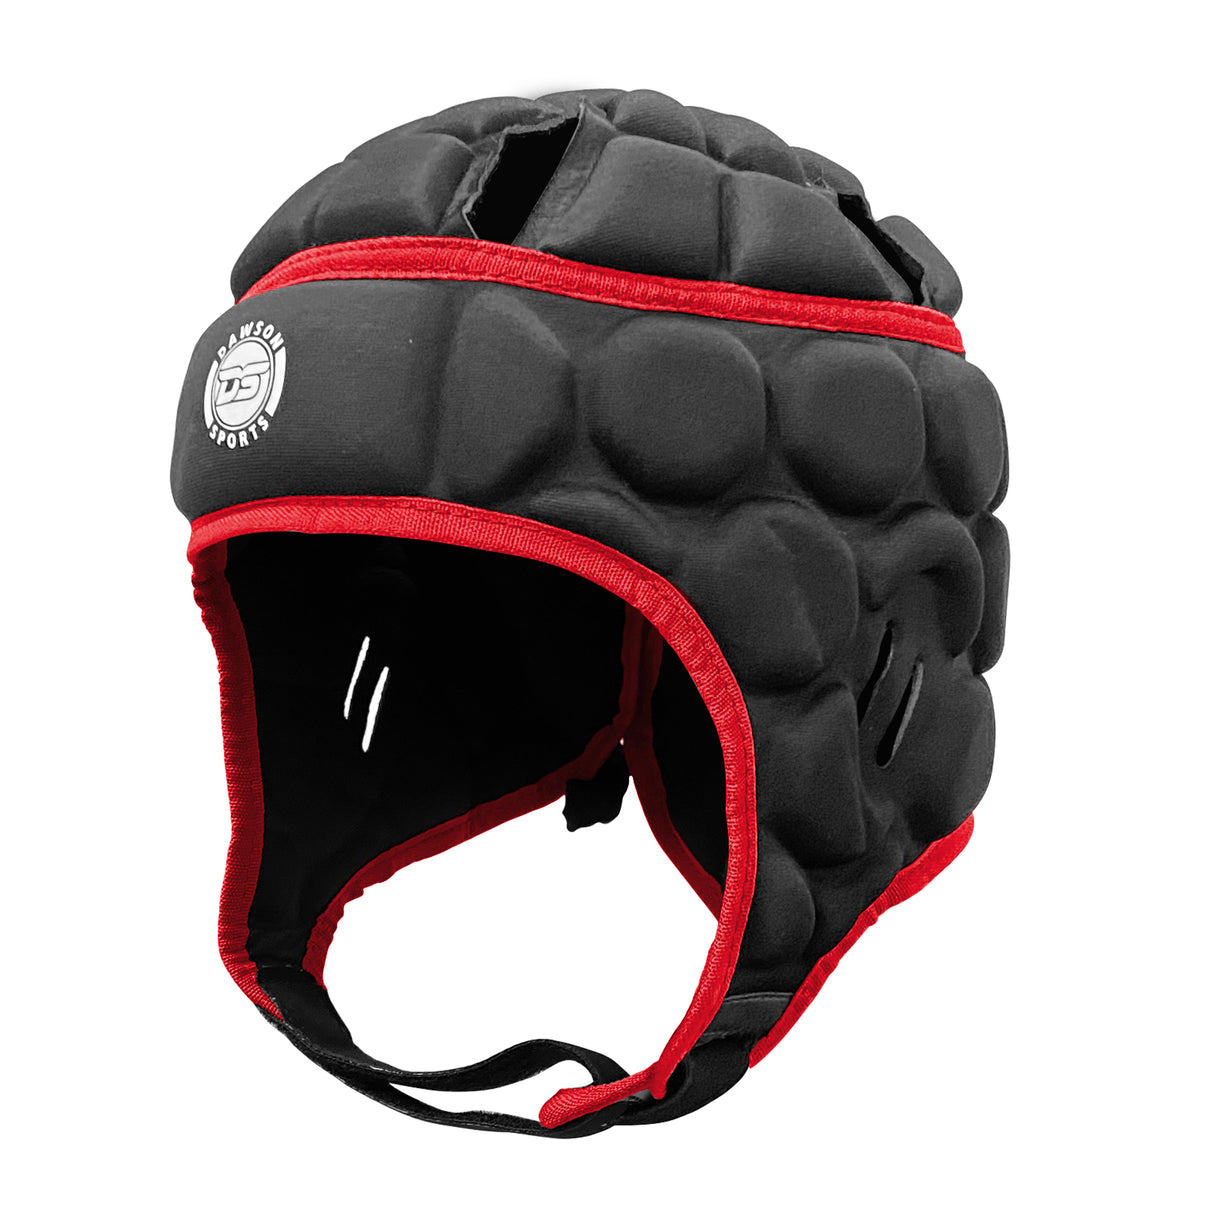 DS PRO Headguard (3 sizes available)